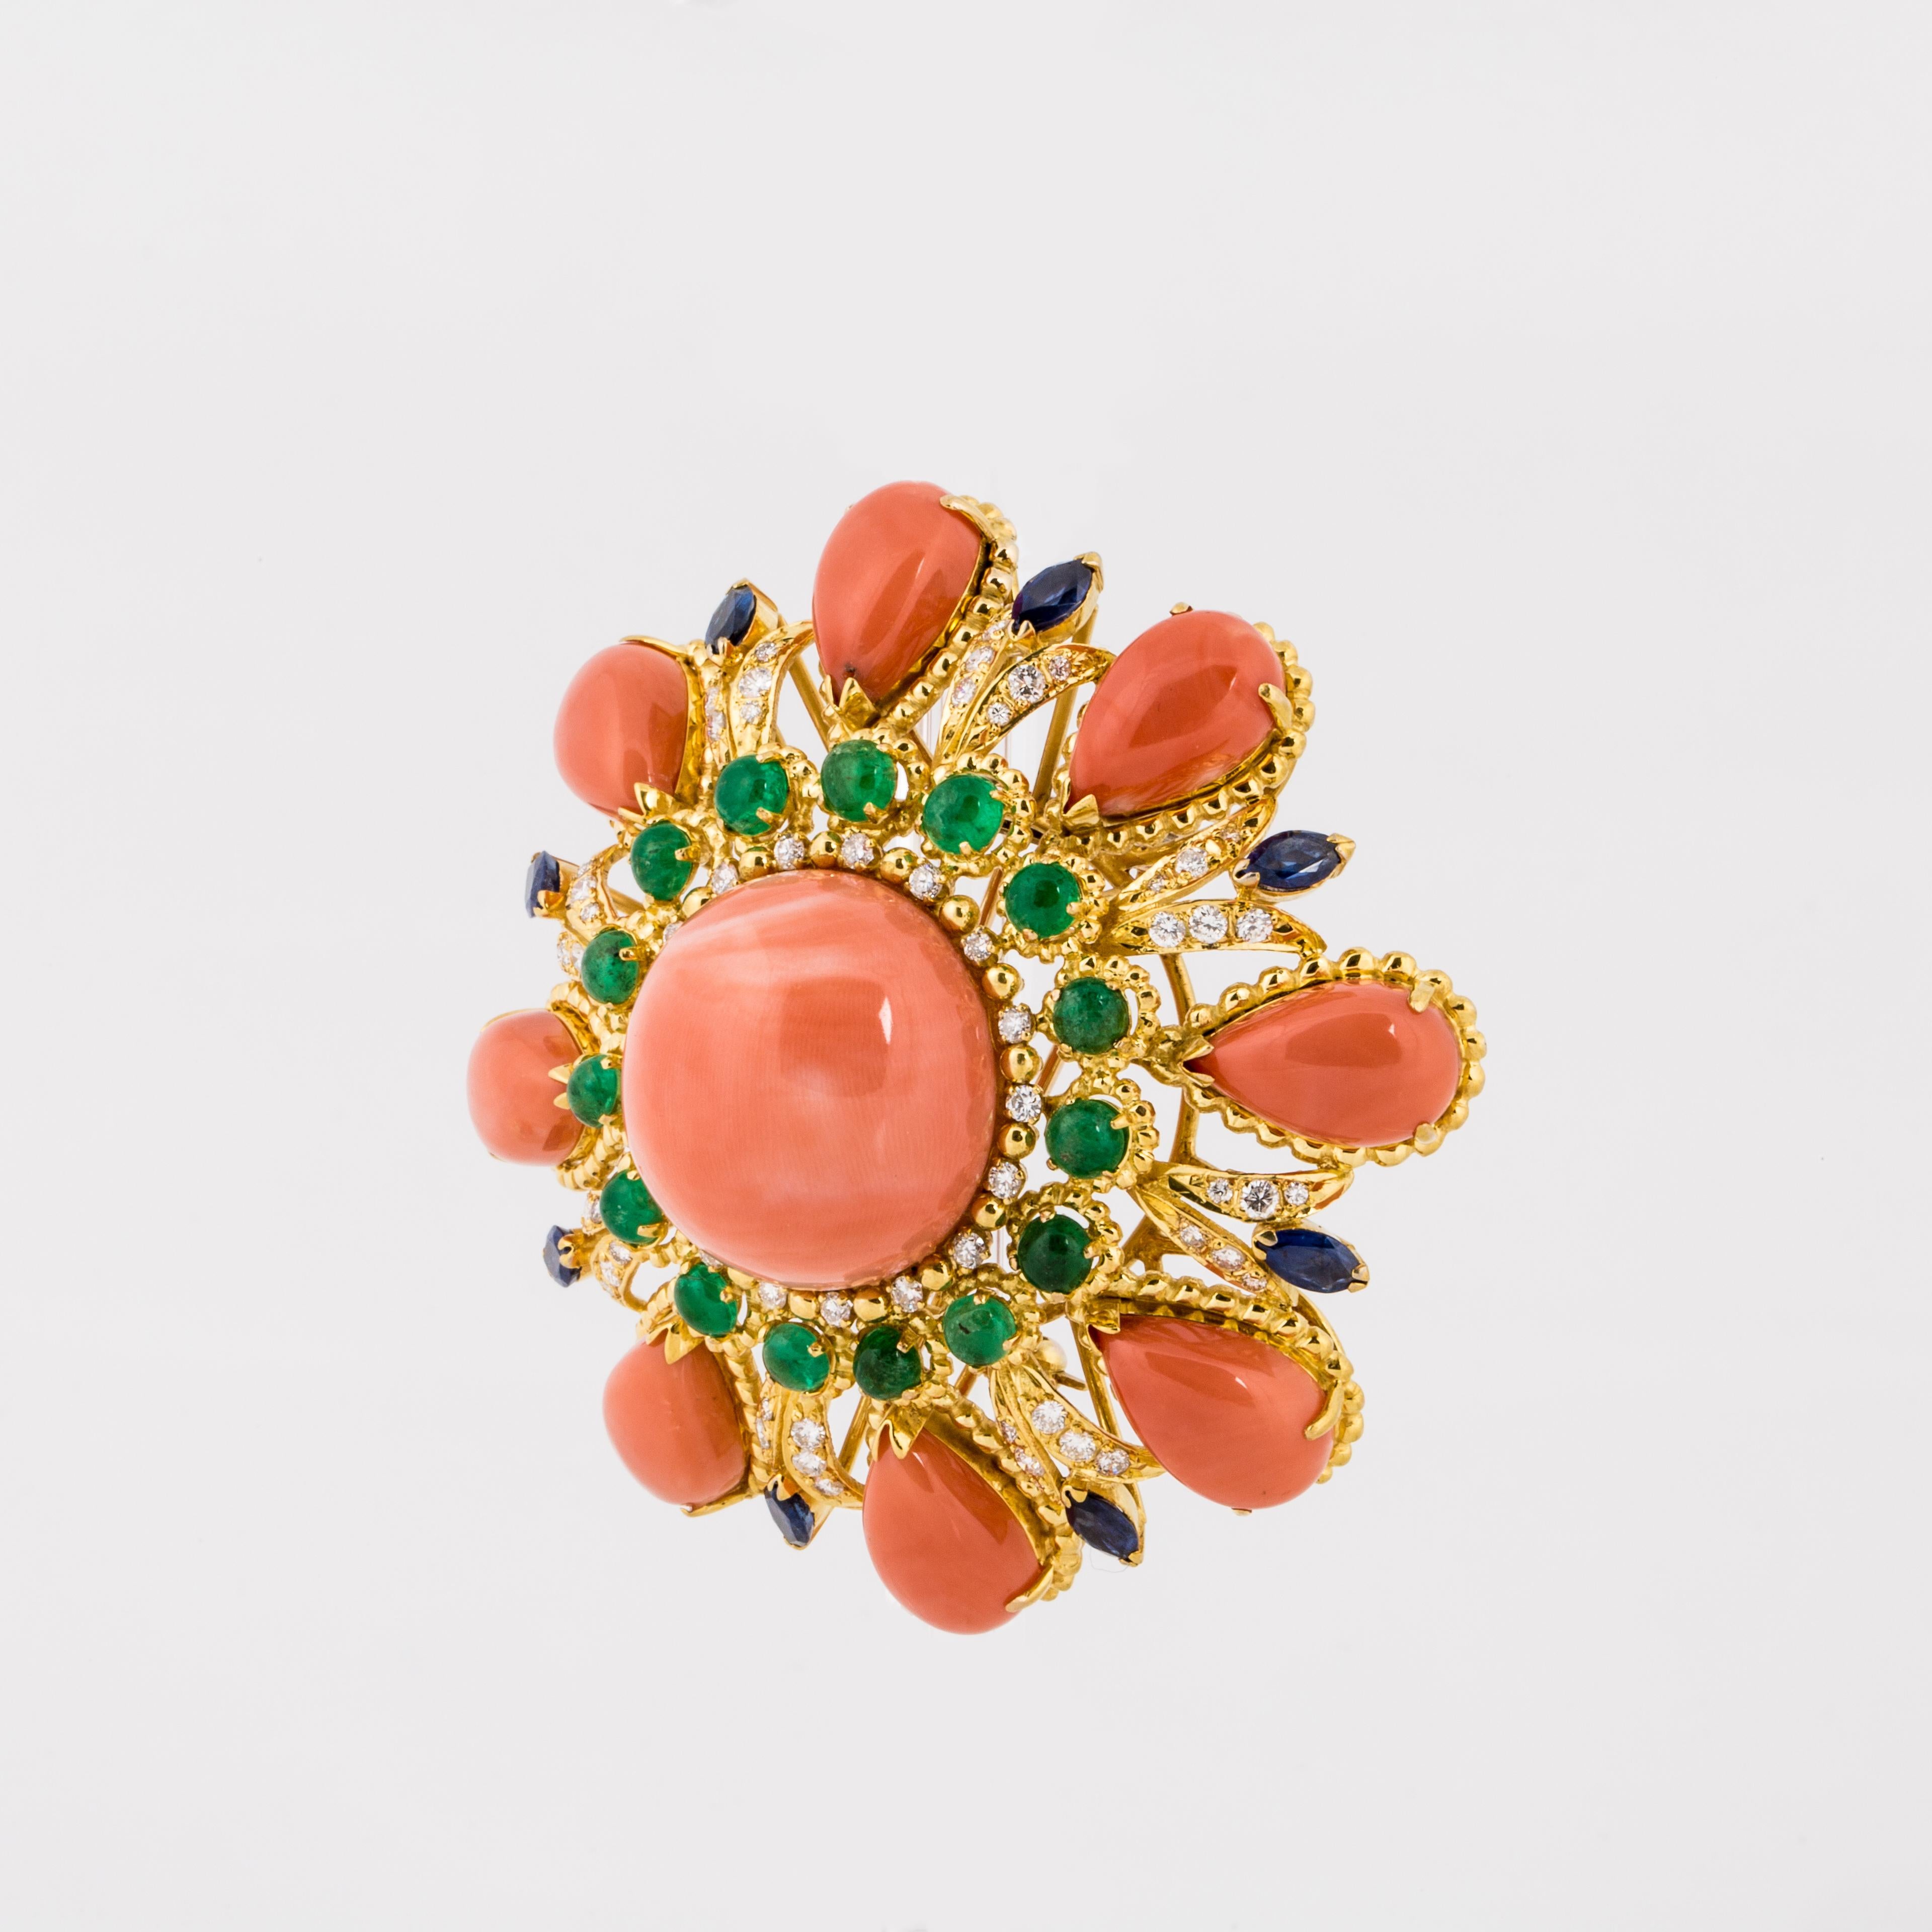 18K yellow gold gemset cluster brooch featuring a large 23.5 mm coral cabochon centerpiece, 8 coral teardrop shaped cabochons measuring approximately 15 x 9 x 5 mm, 15 emerald cabochons measuring approximately 4 mm each, 8 marquise sapphires